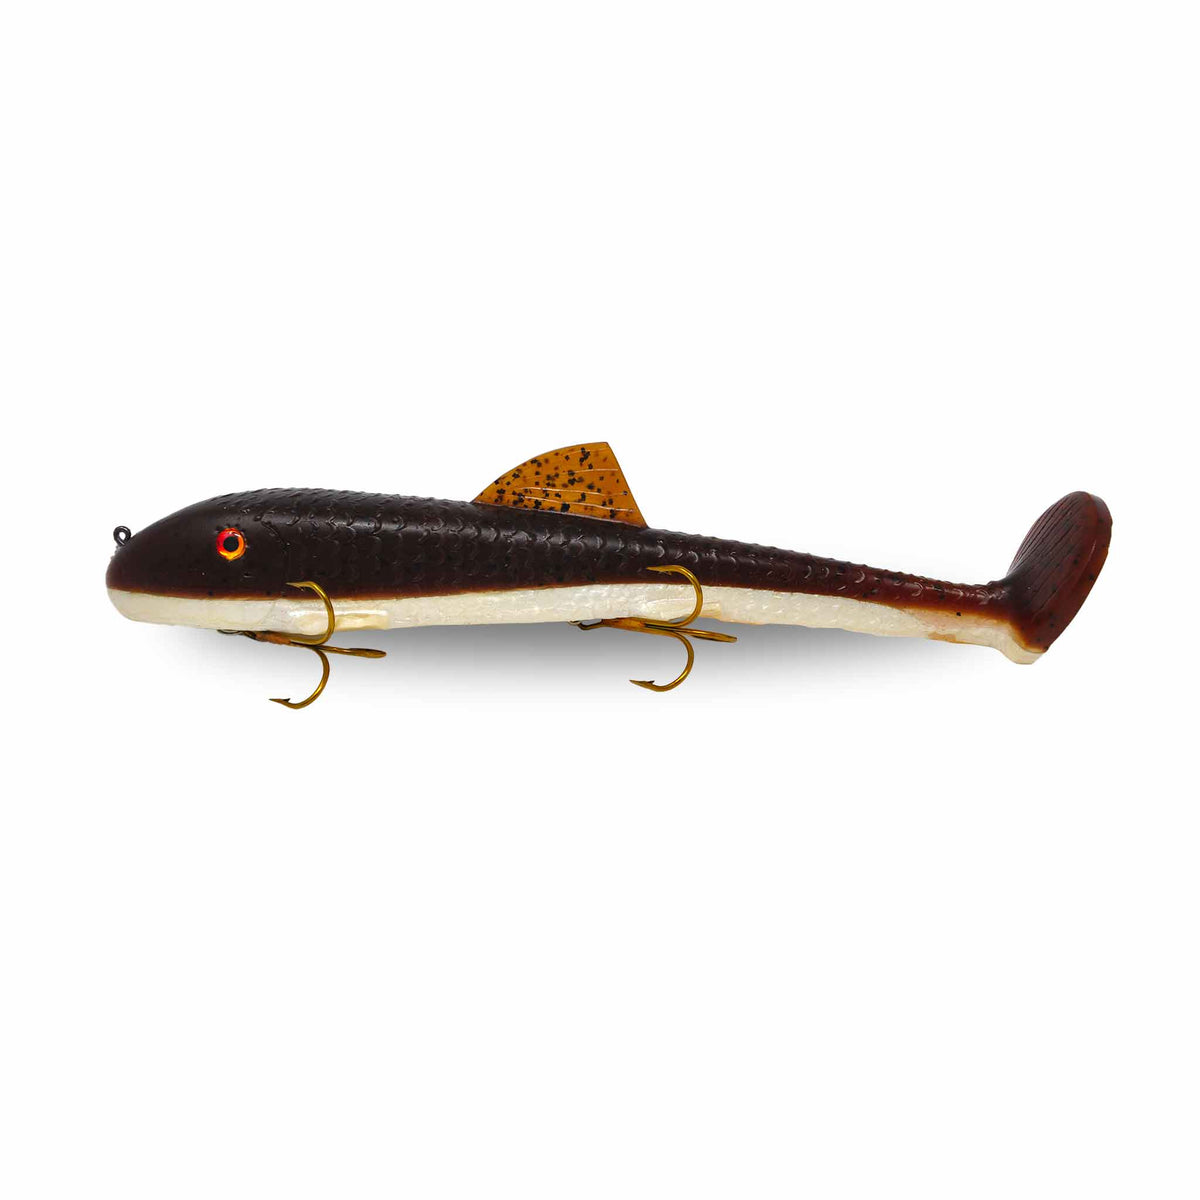 View of Rubber Suick Suzy Sucker 13" Swimbait Brown Sucker available at EZOKO Pike and Musky Shop